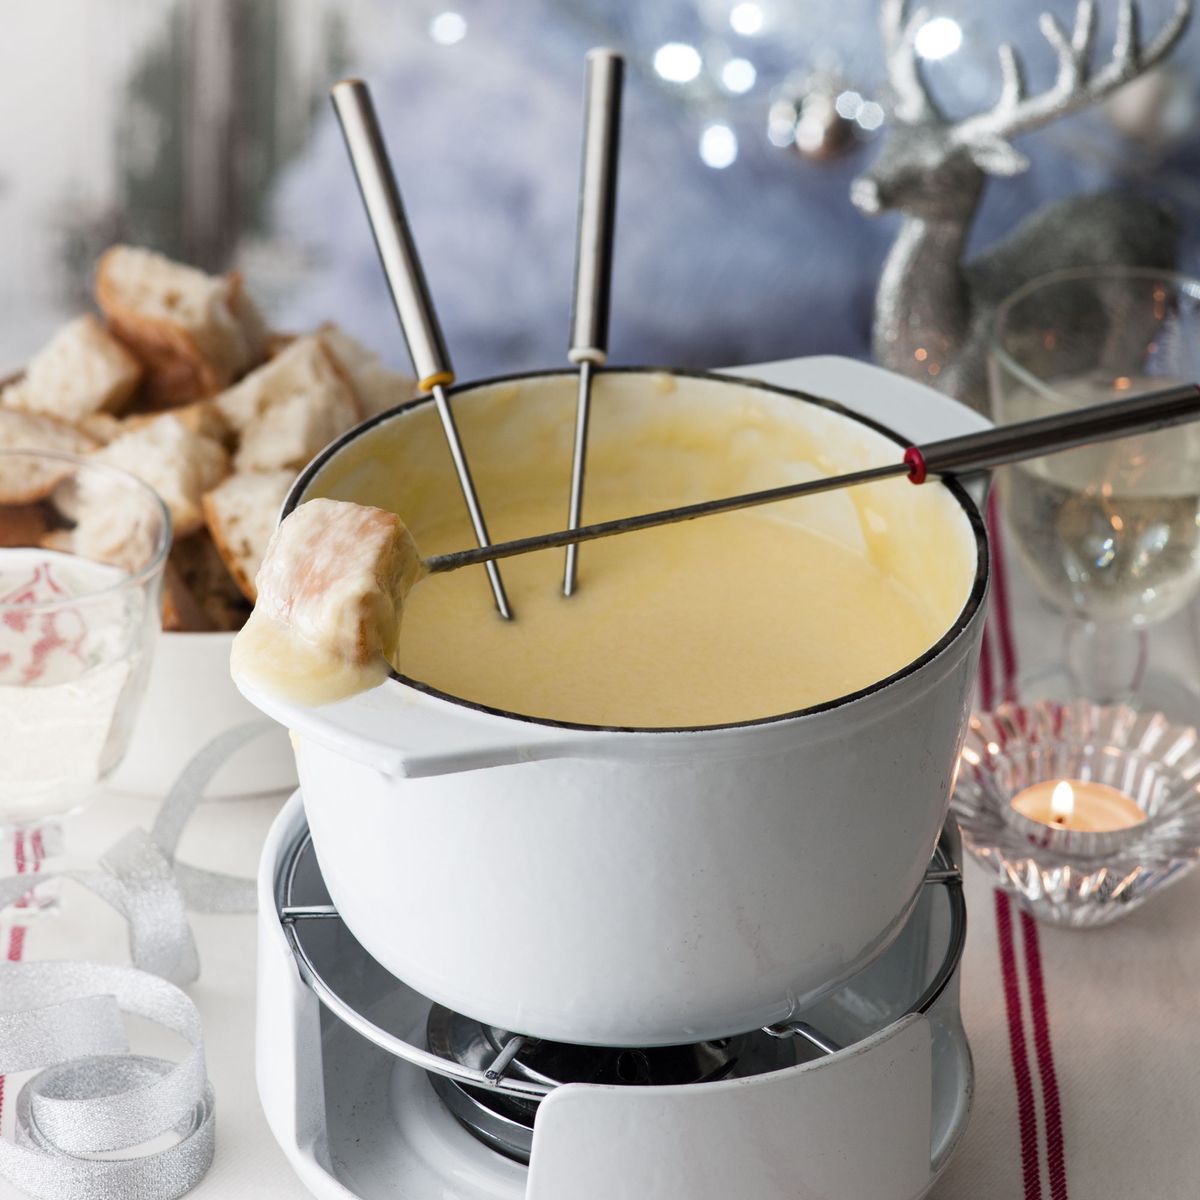 Try this retro kirsch cheese fondue starter idea to bring your family together this Christmas